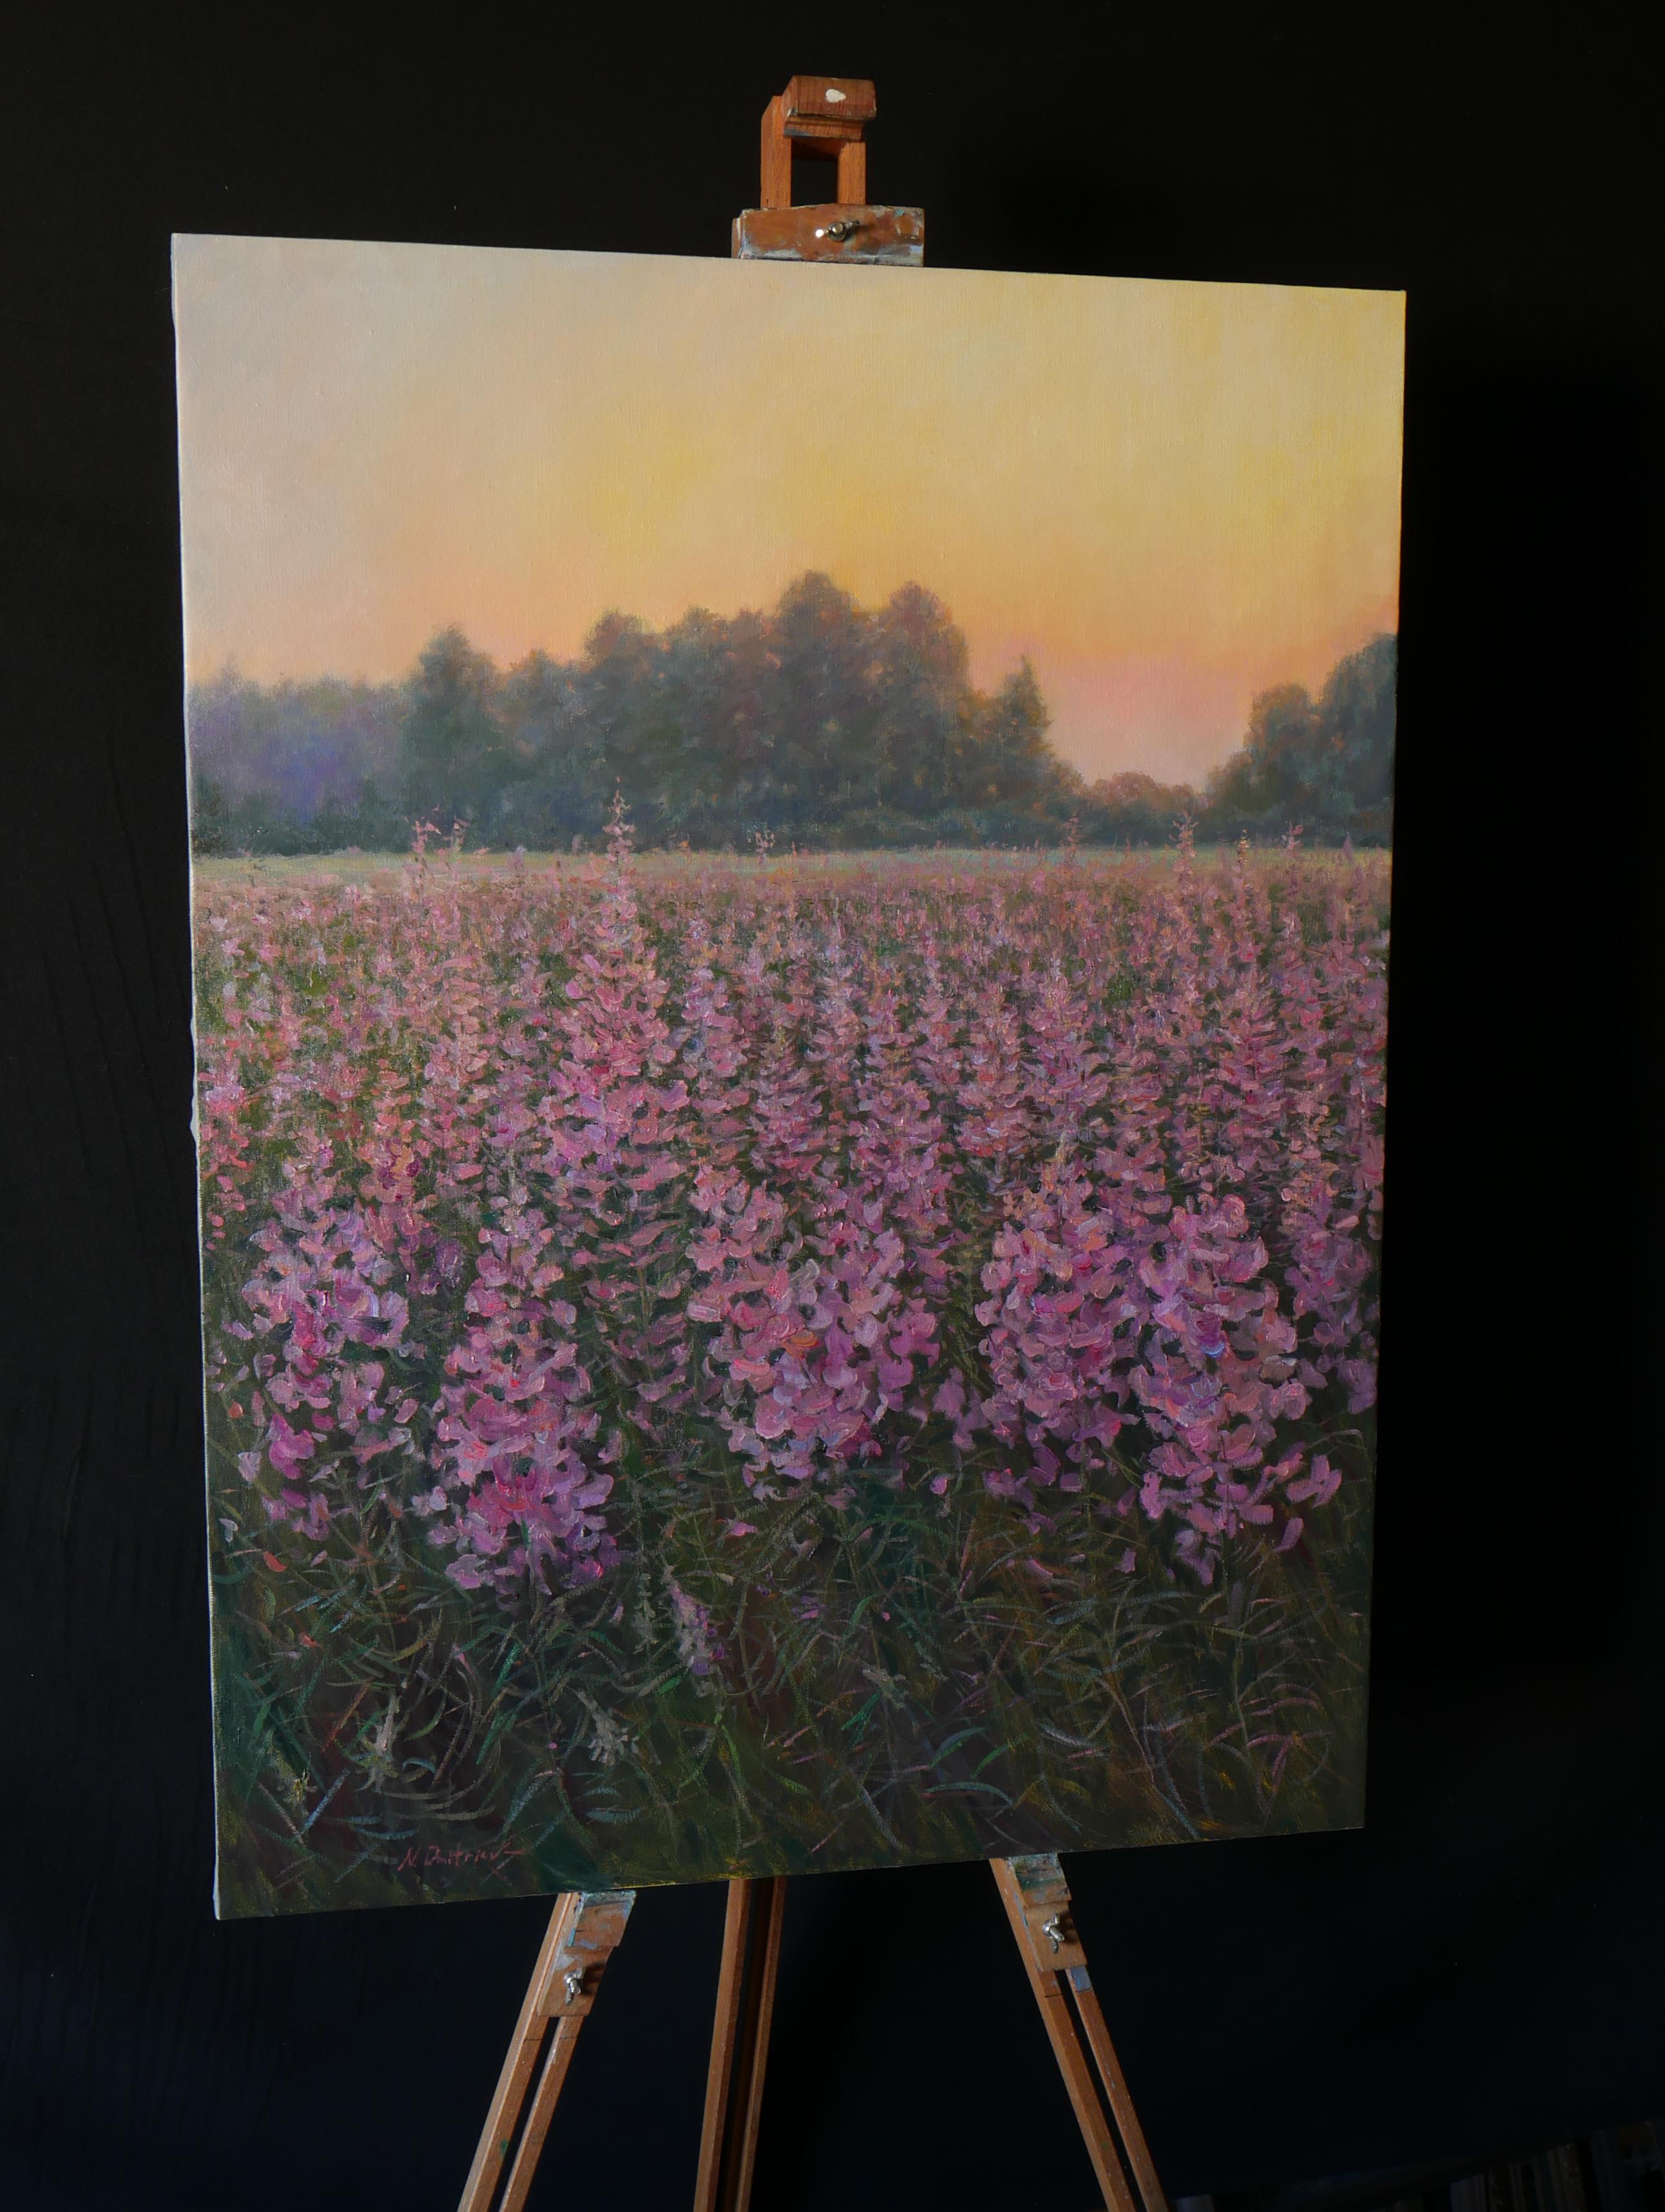 Sunset Over The Fireweed Field - sunset landscape painting - Impressionist Painting by Nikolay Dmitriev